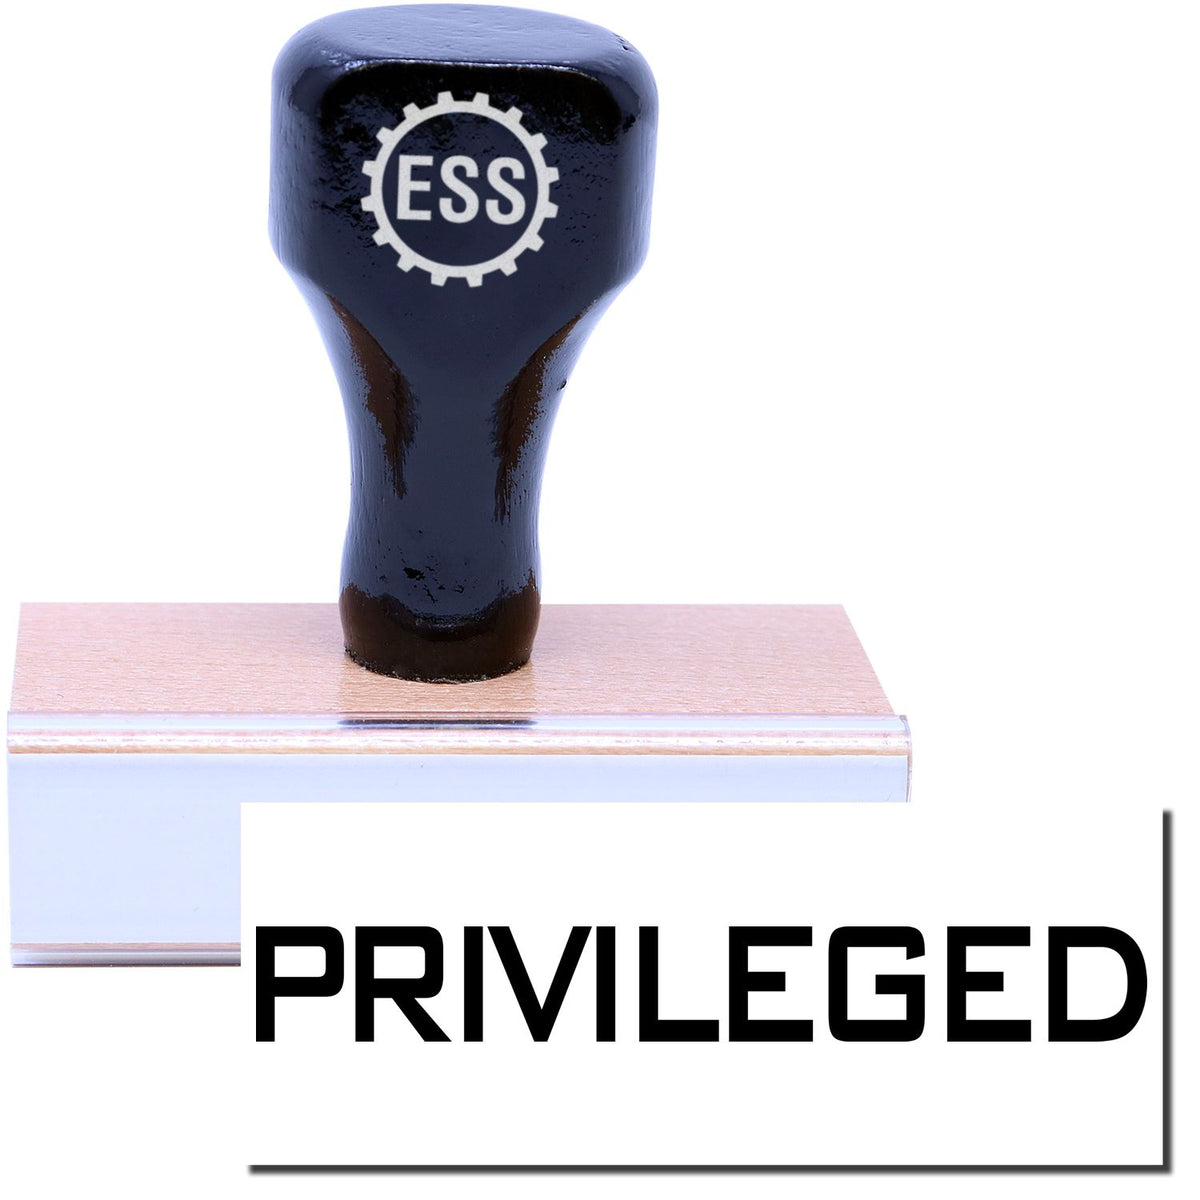 A stock office rubber stamp with a stamped image showing how the text &quot;PRIVILEGED&quot; is displayed after stamping.